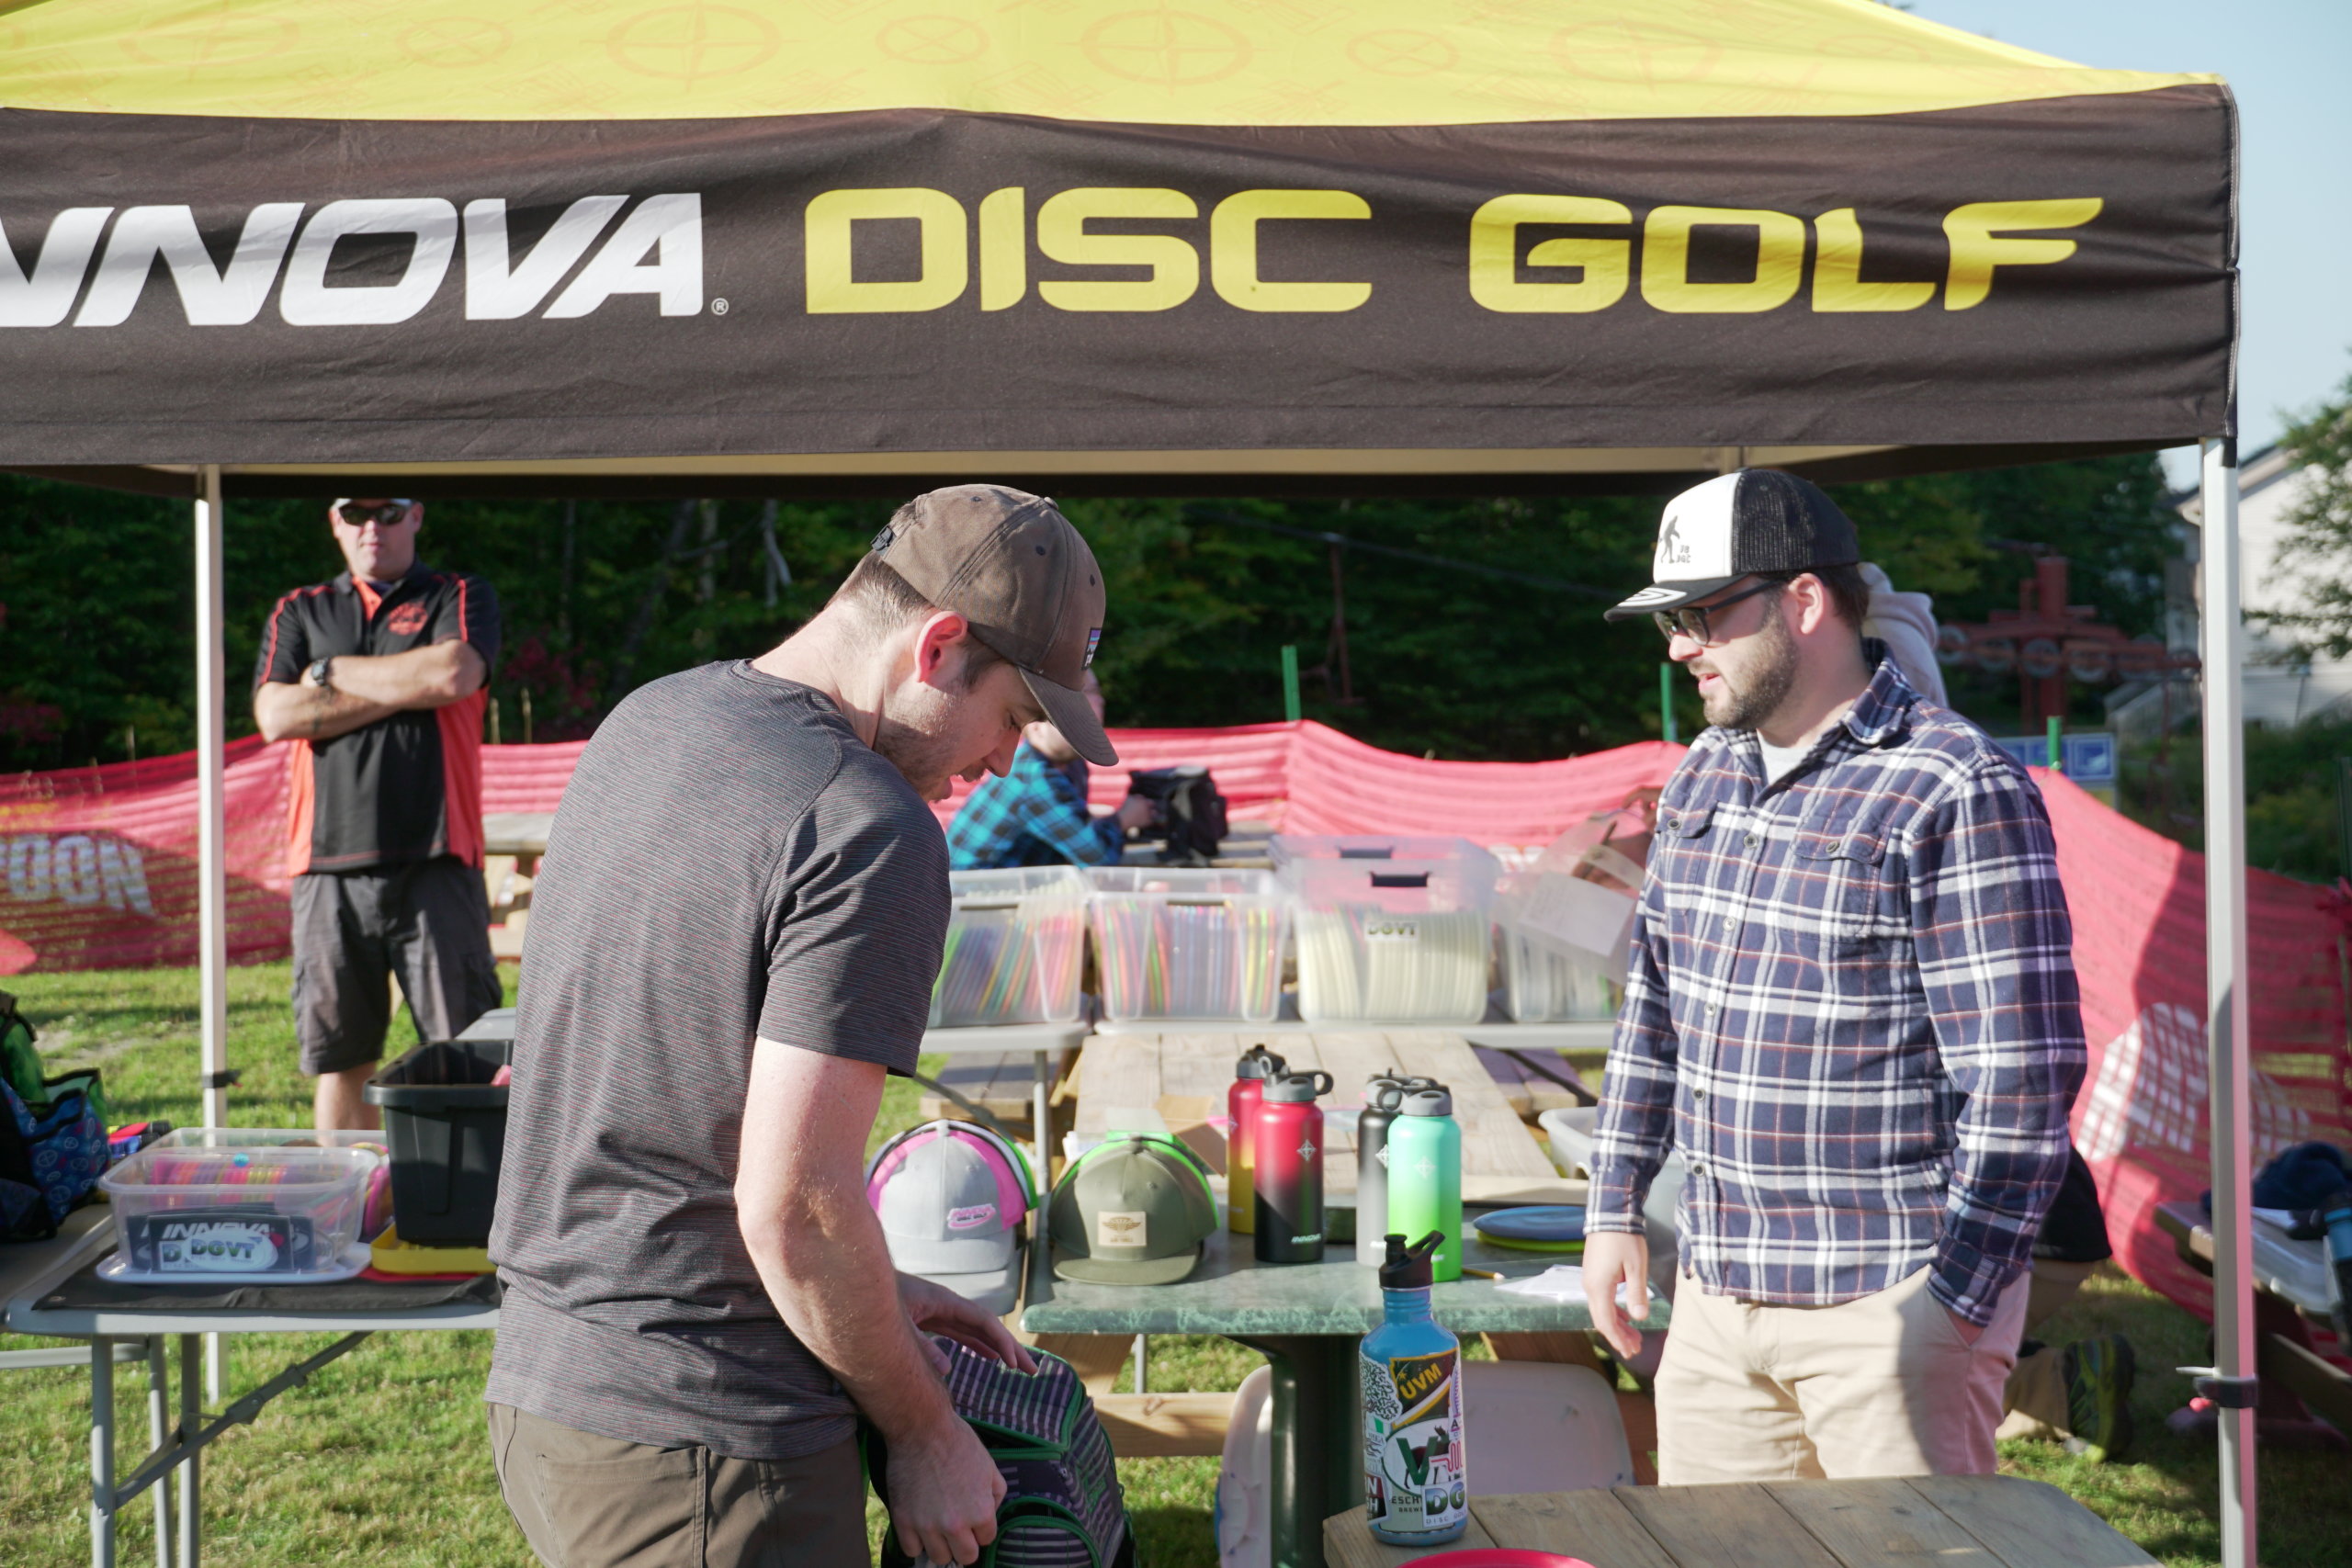 Gathering for the Annual Vista Beast Disc Golf Challenge at Bolton Valley